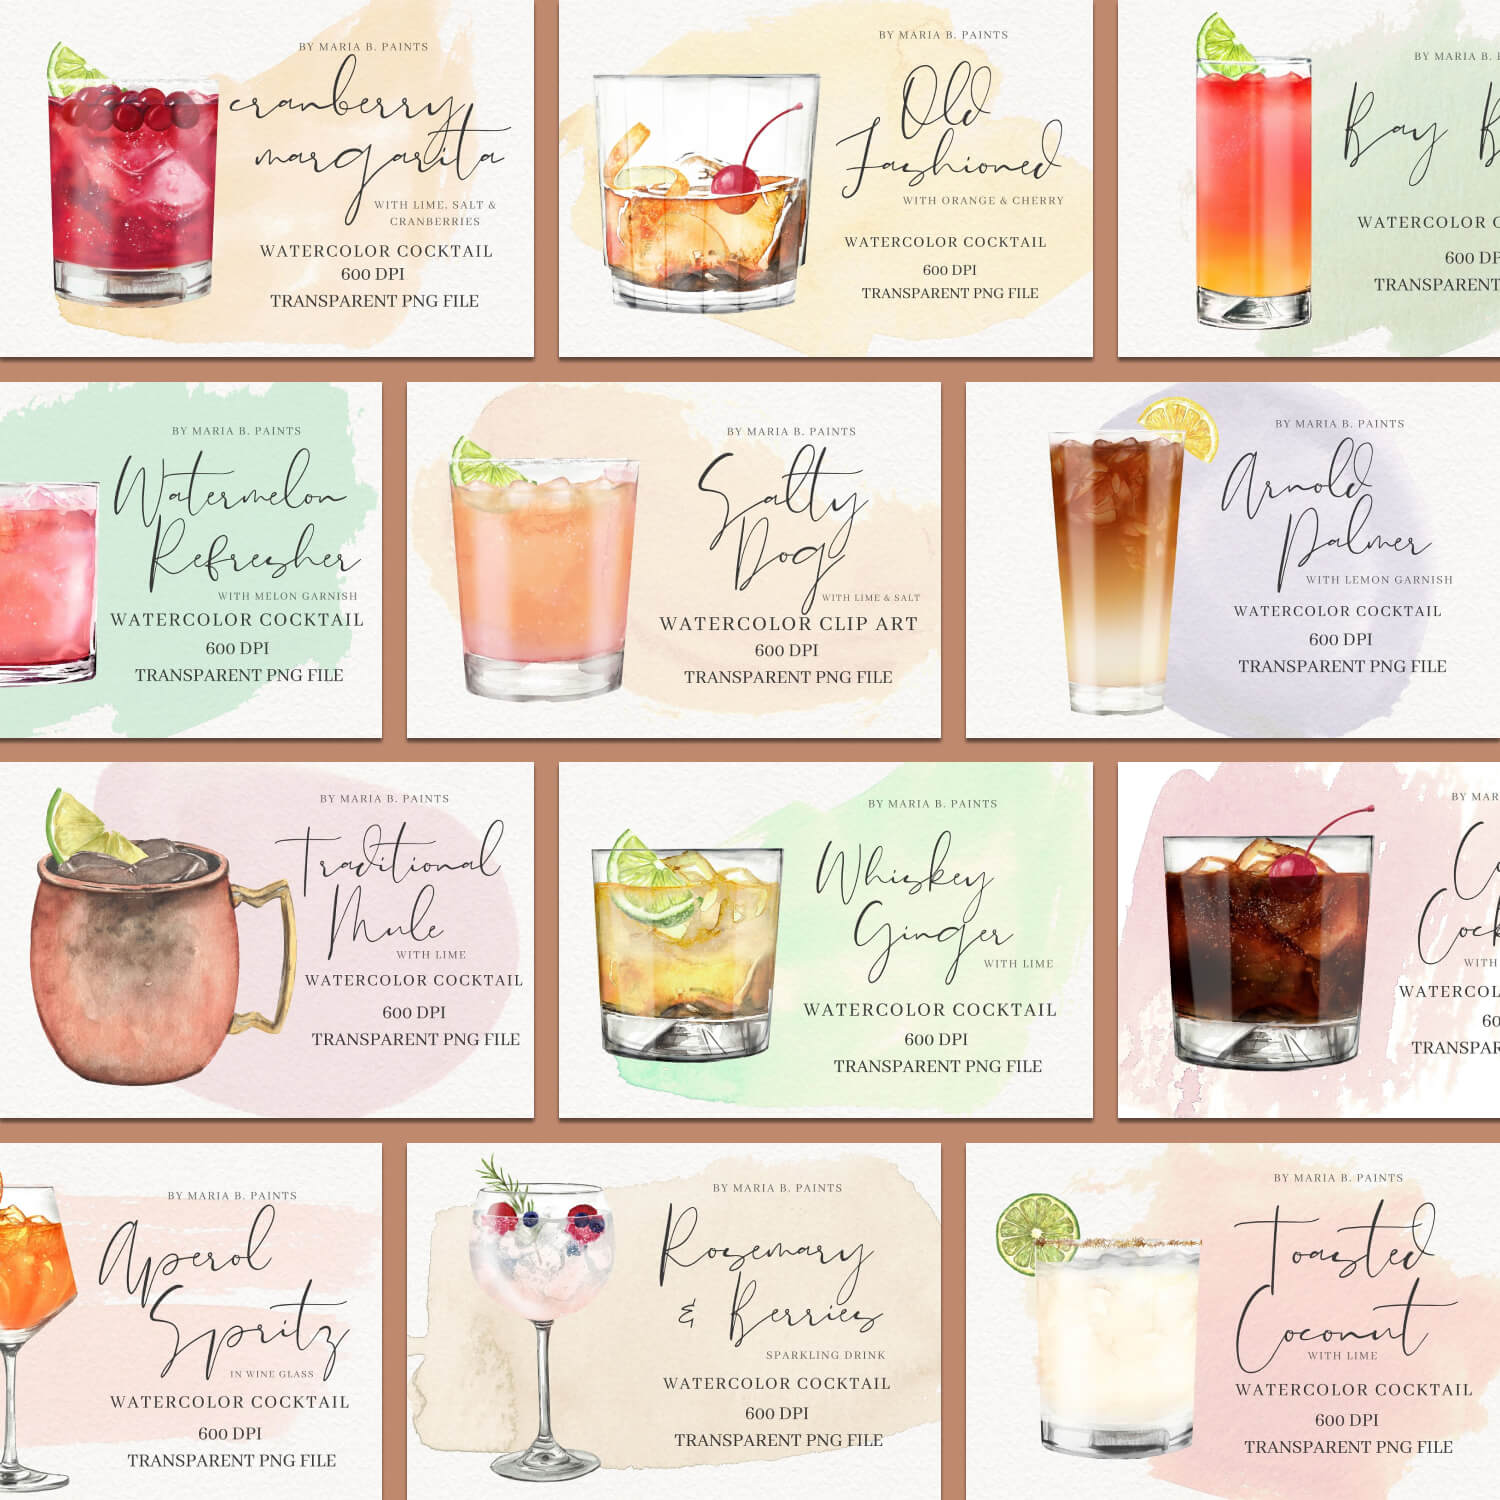 Many types of cocktails.